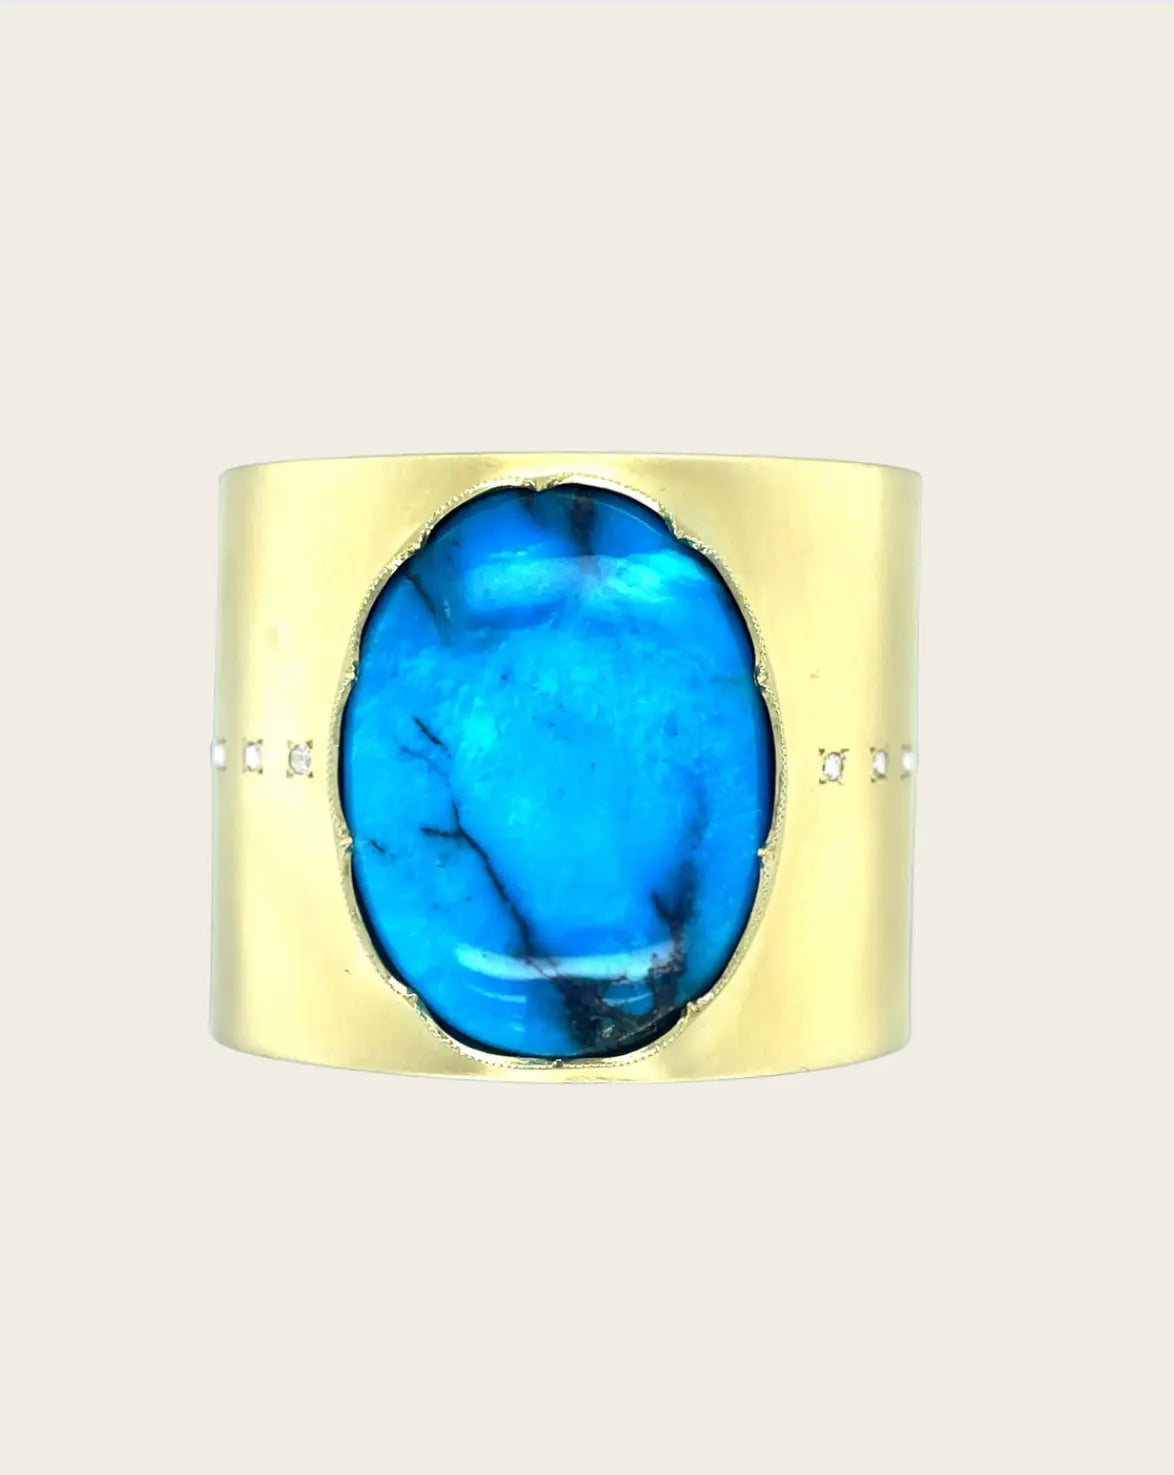 One-of-a-kind turquoise cuff One-of-a-kind turquoise cuff Irene Neuwirth Irene Neuwirth  Squash Blossom Vail